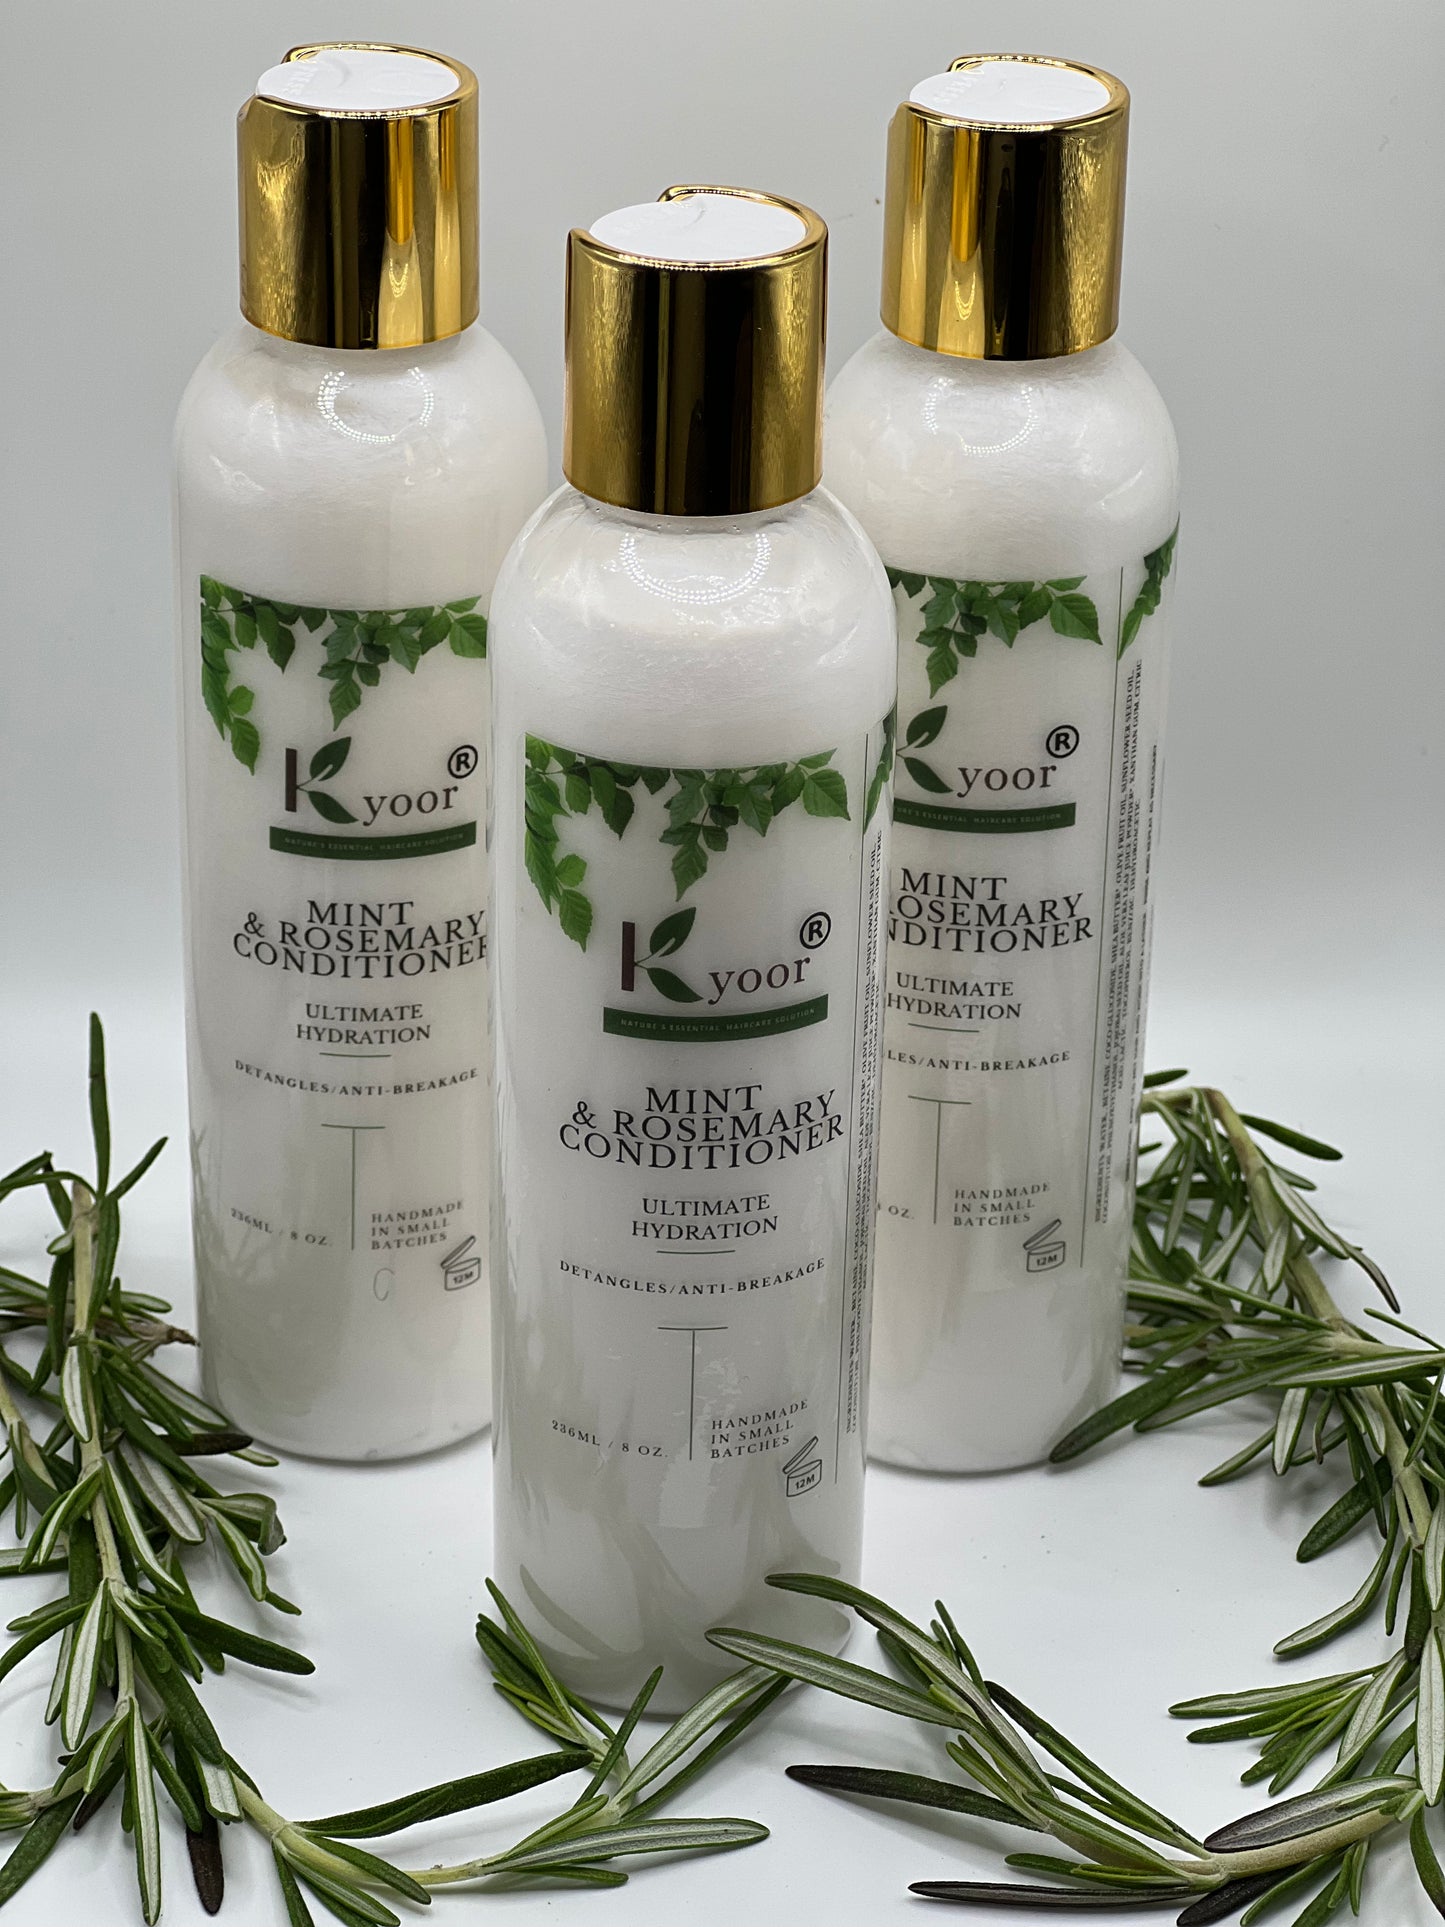 Mint & Rosemary Conditioner